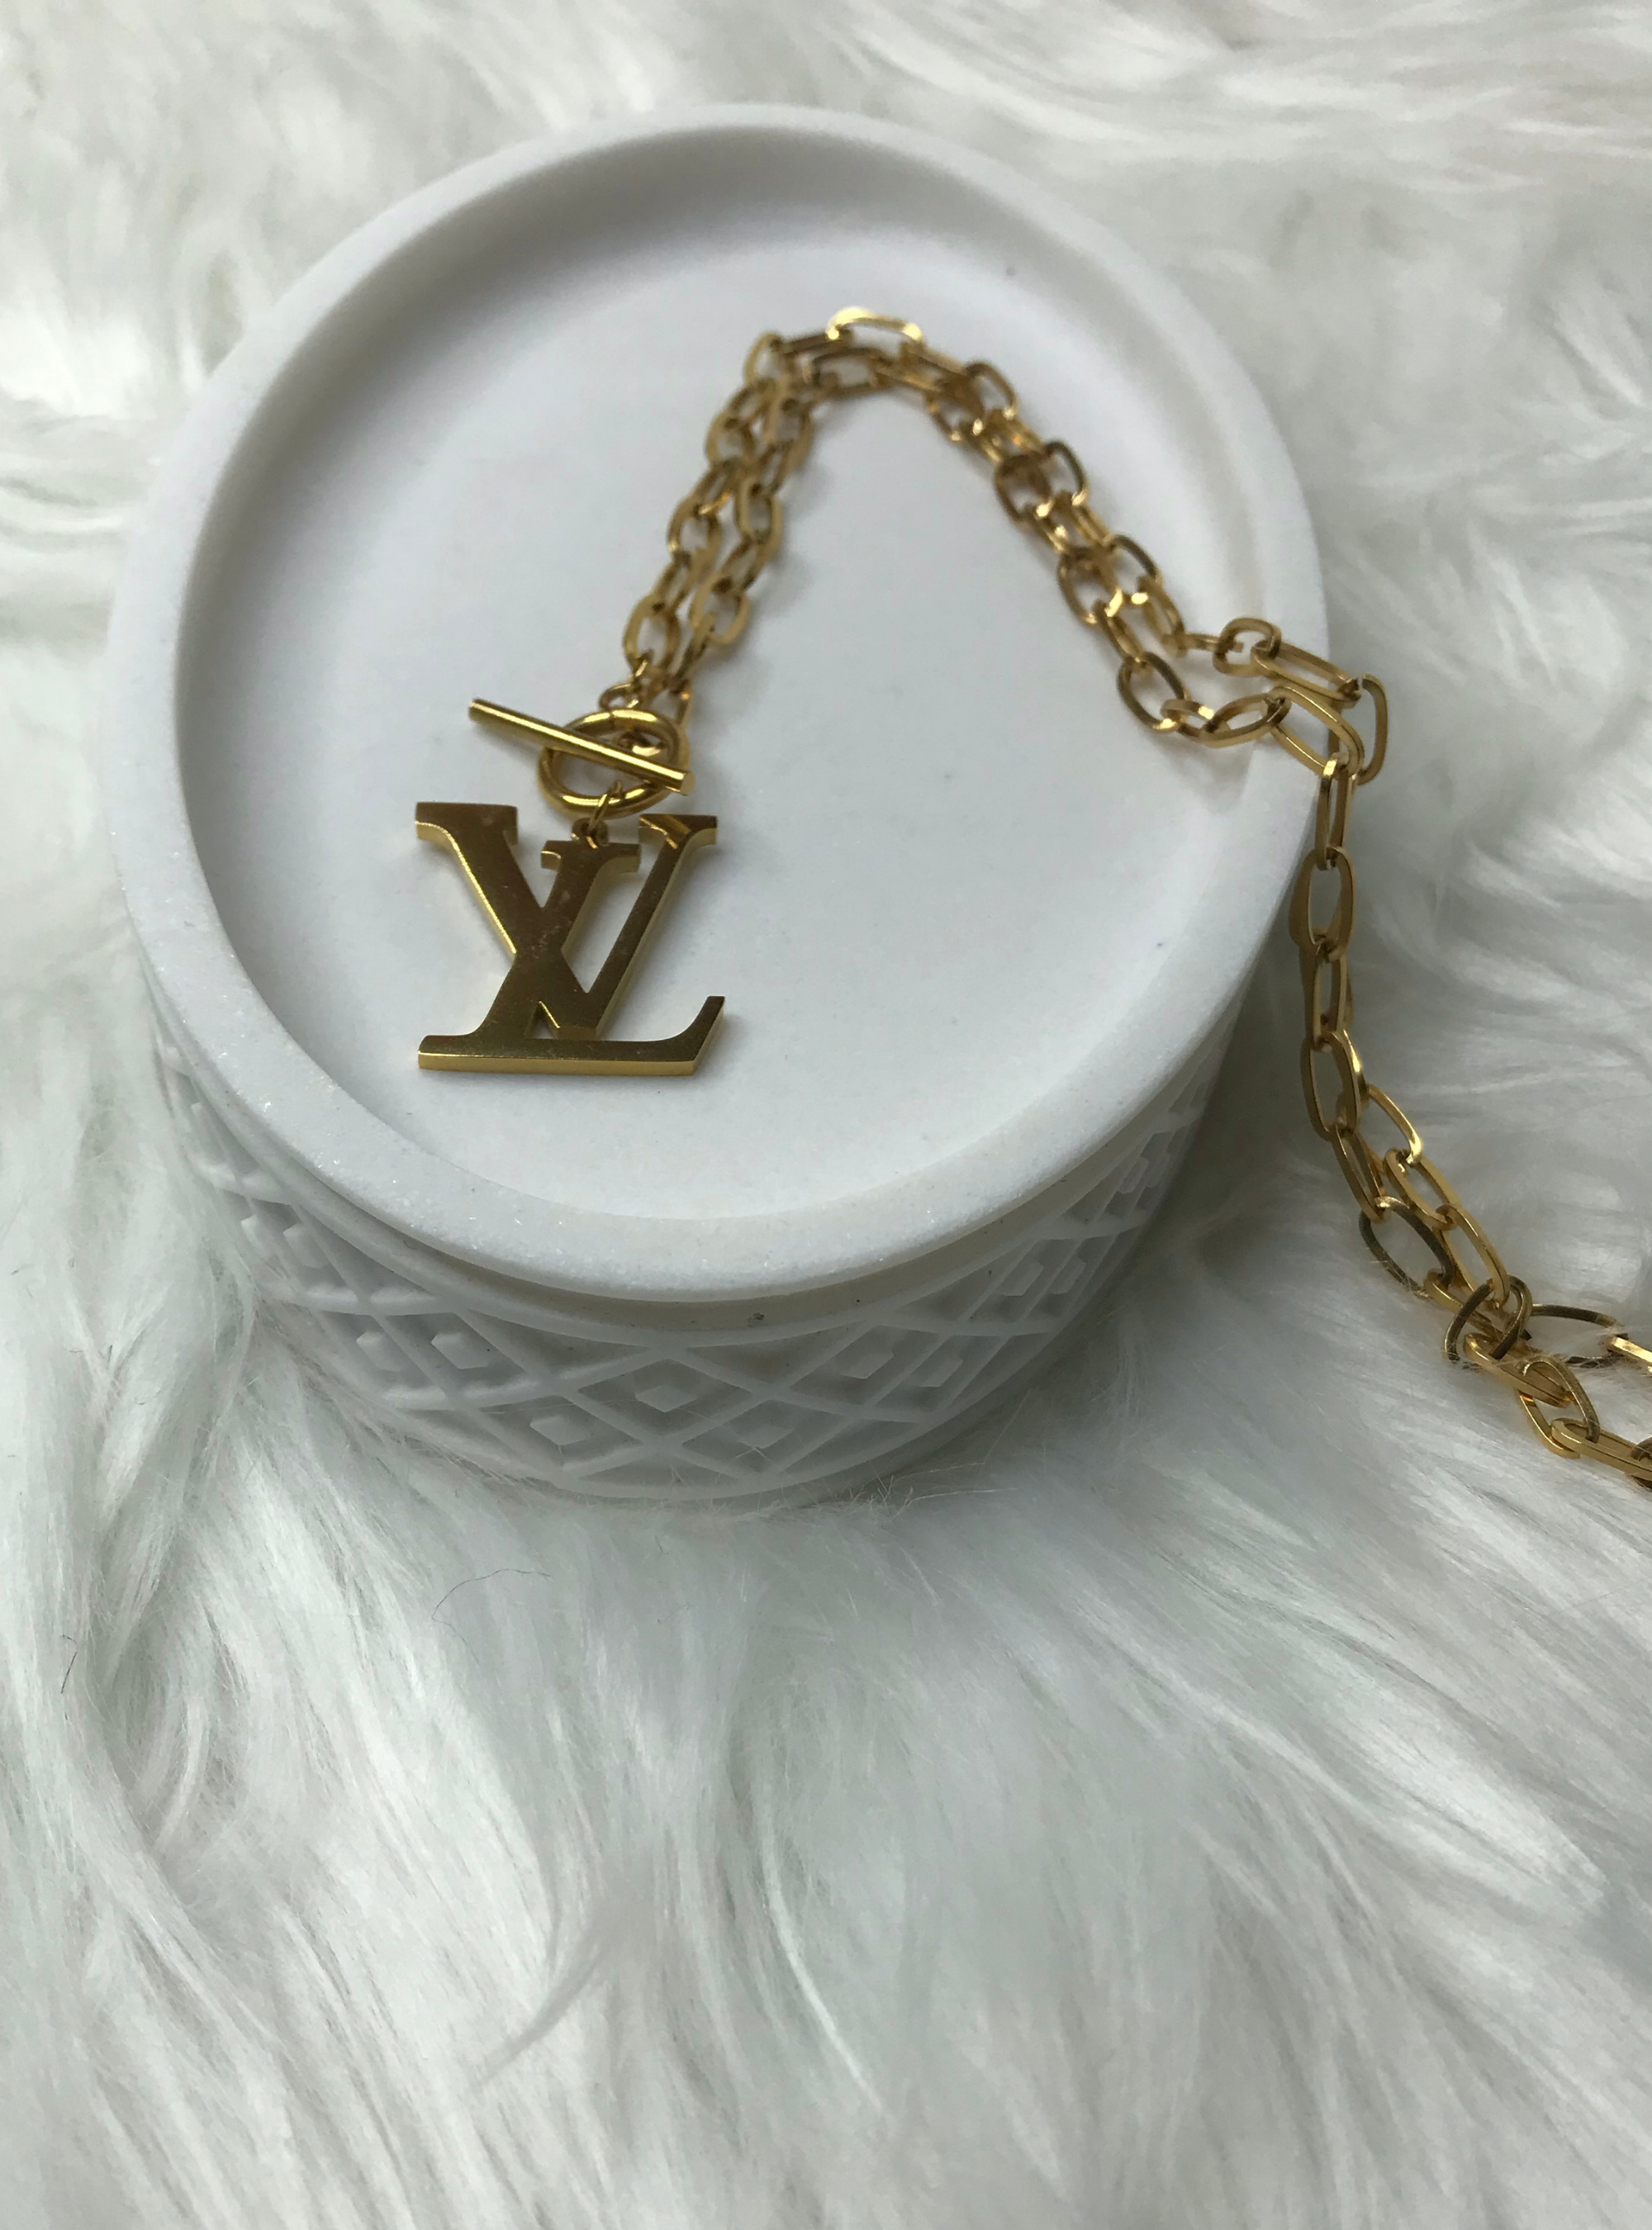 Repurposed / Reworked Big LV Charm Necklace - glamaristyles